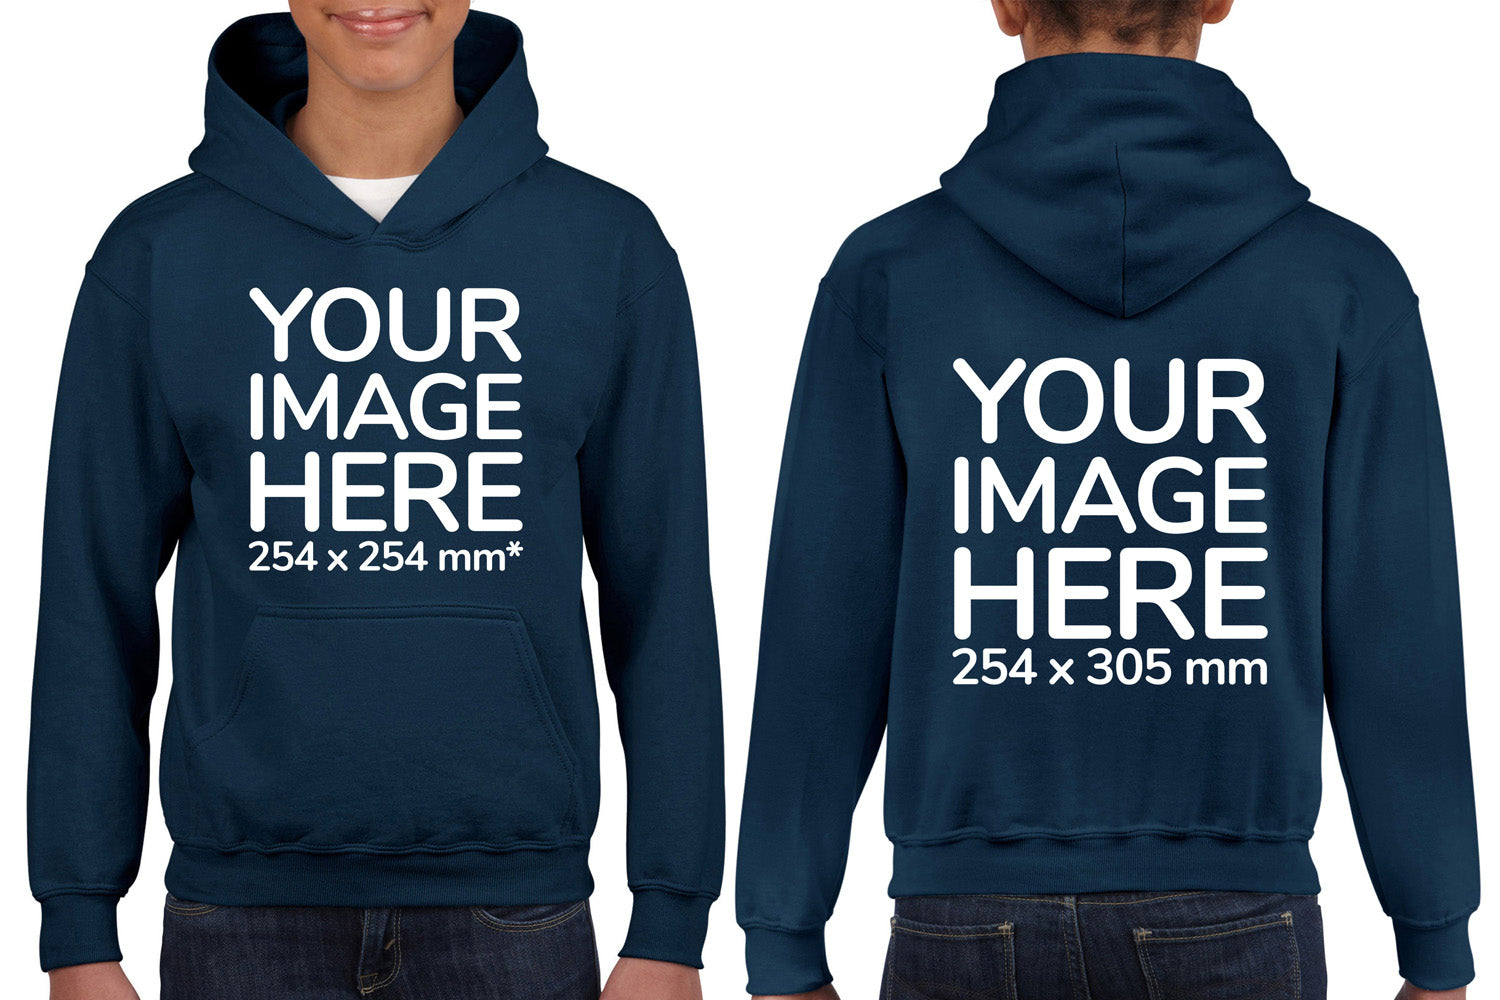 Dark Blue Kids Hoodies - with image area on front and back